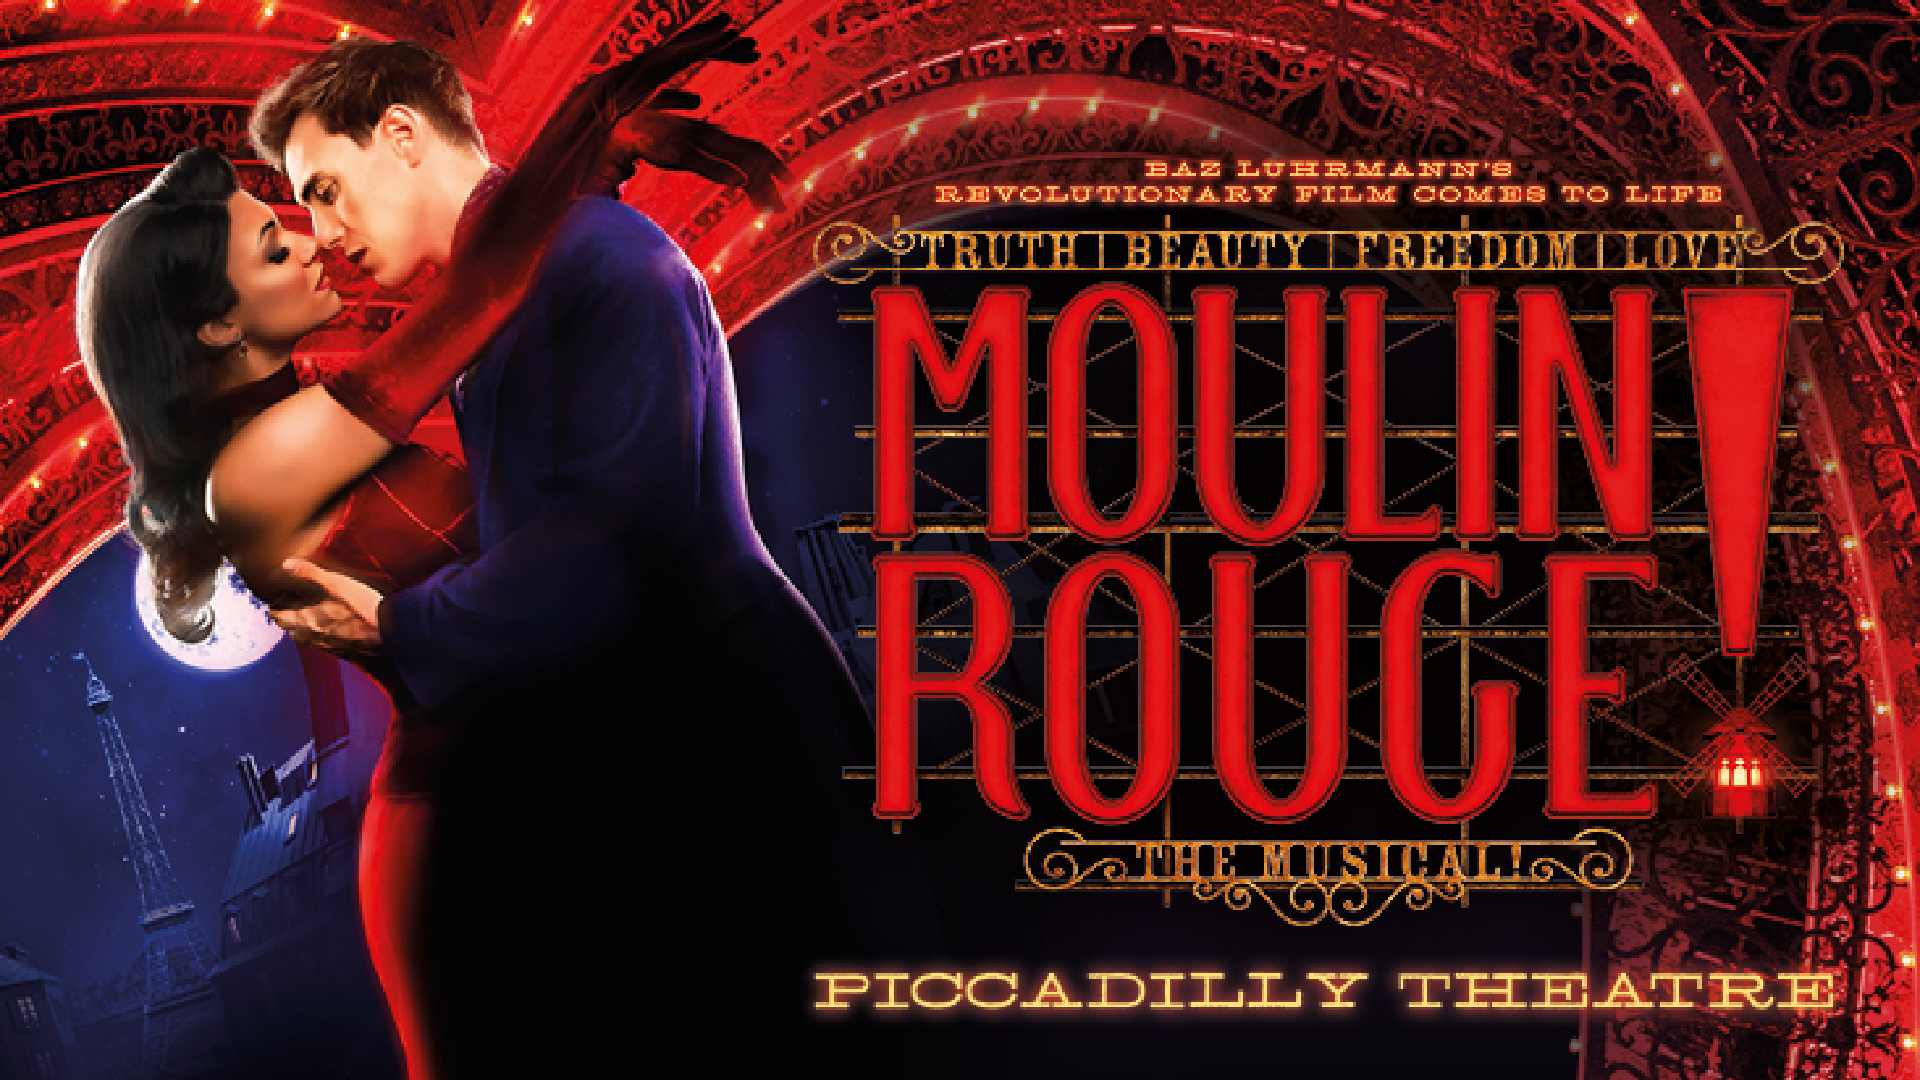 Moulin Rouge<br>Exclusive Seats from £59!